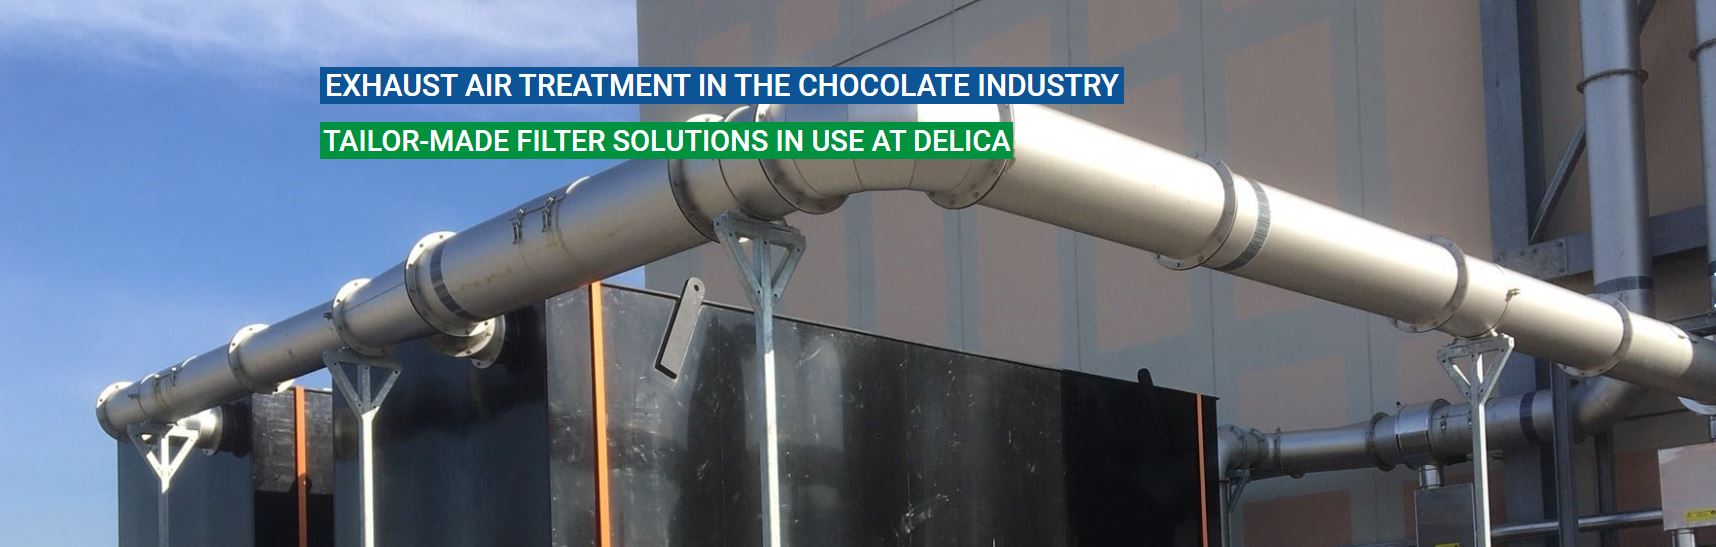 Exhaust air treatment in the chocolate industry